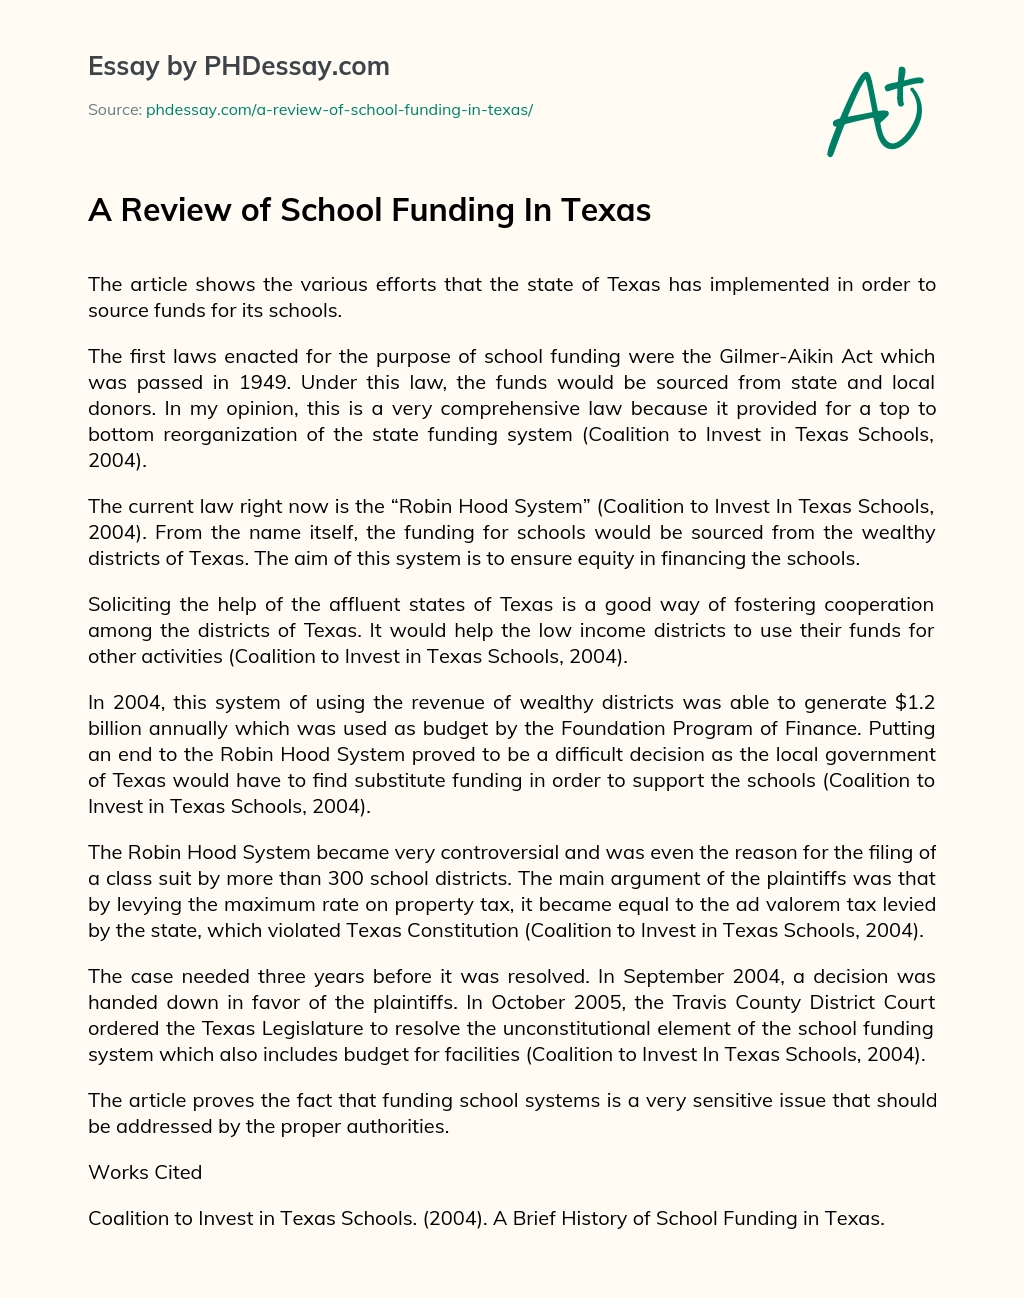 A Review of School Funding In Texas essay